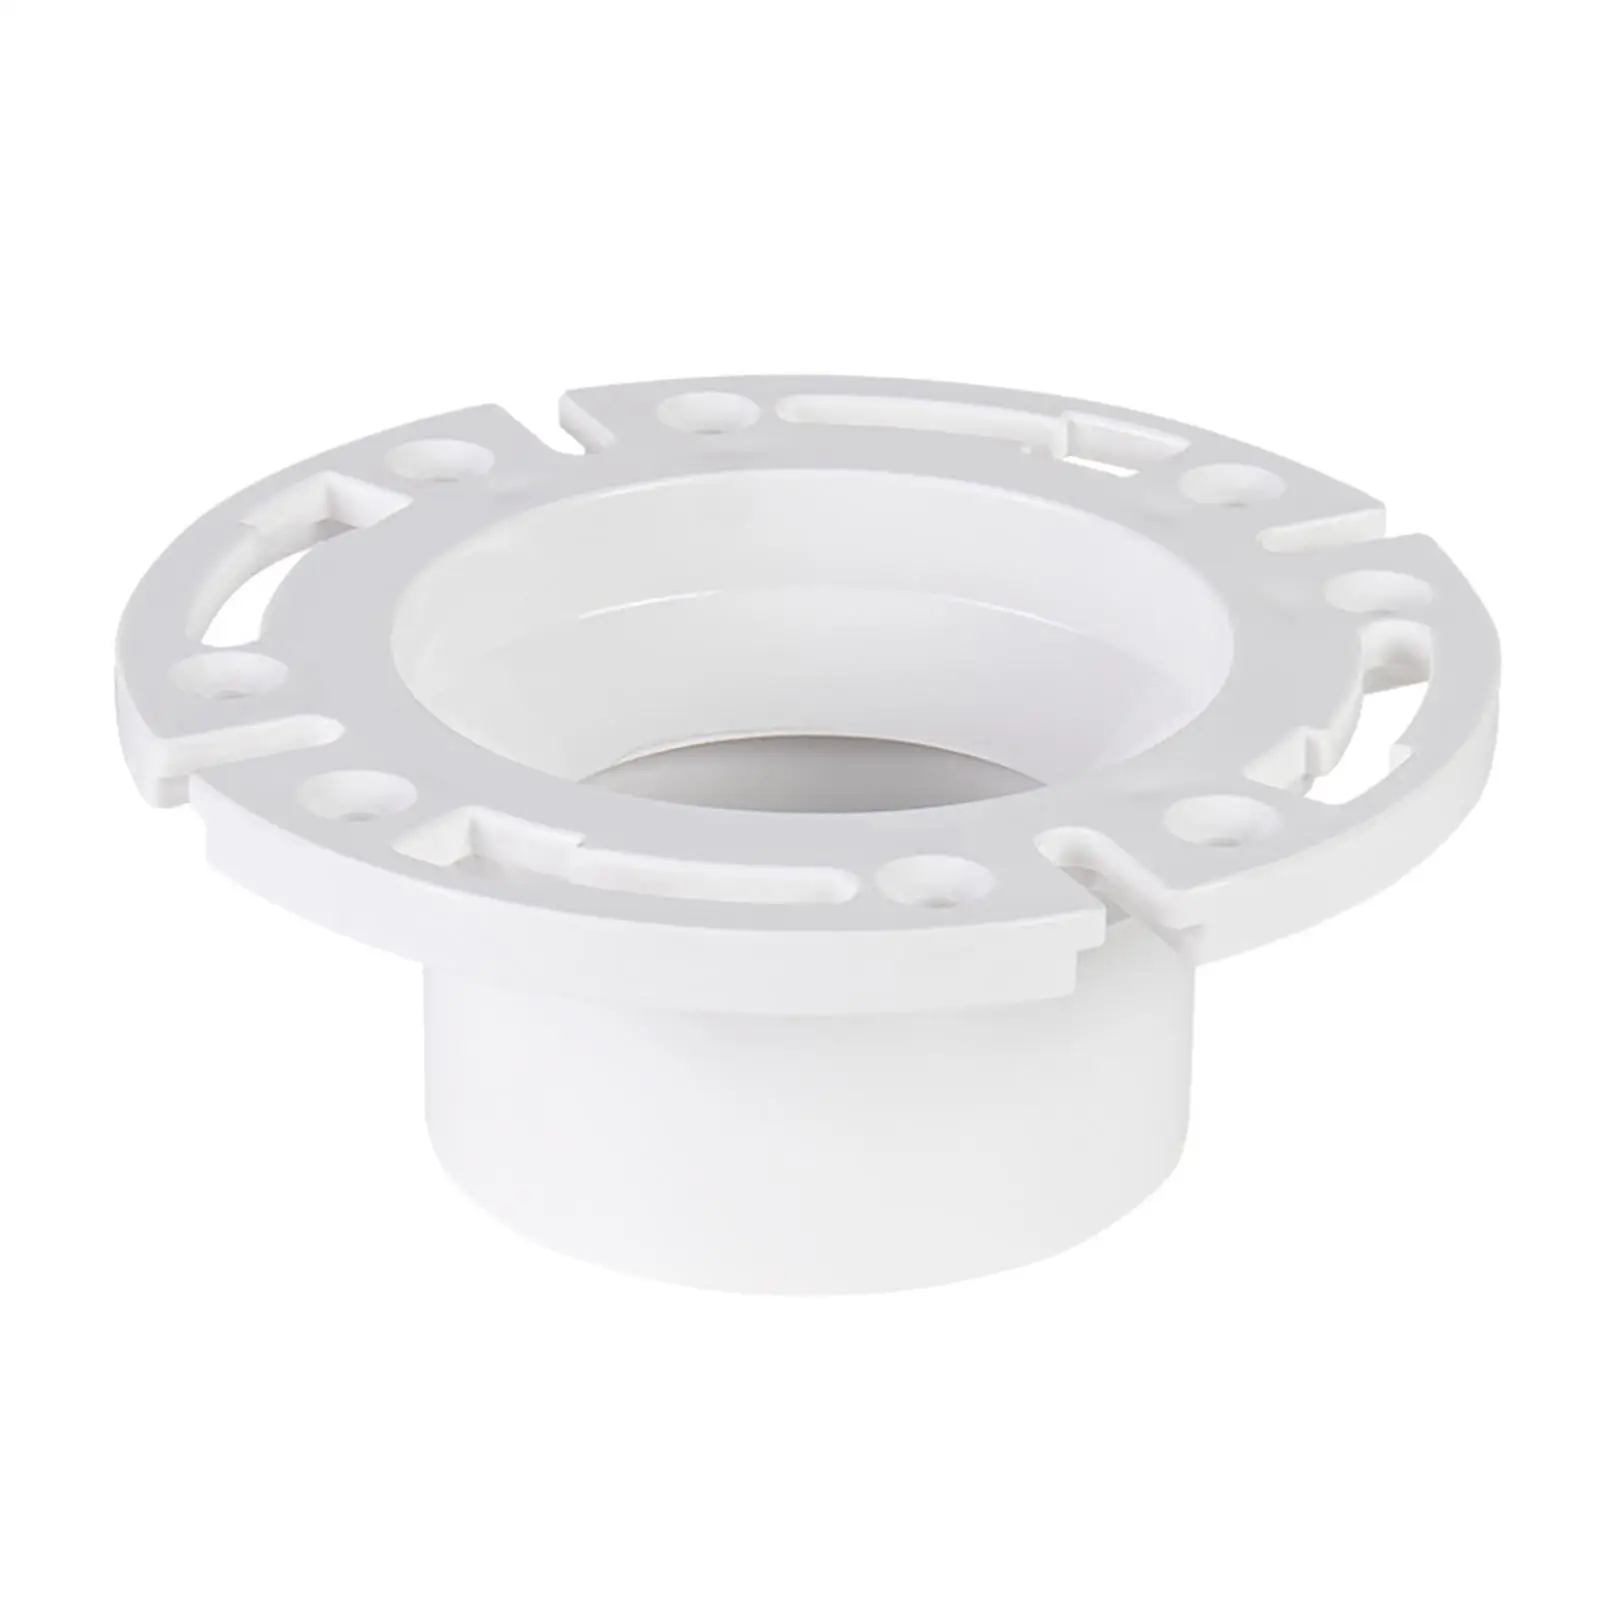 RV Toilet Flange Easy to Install Motorhome RV Waste Water for 4410 4310